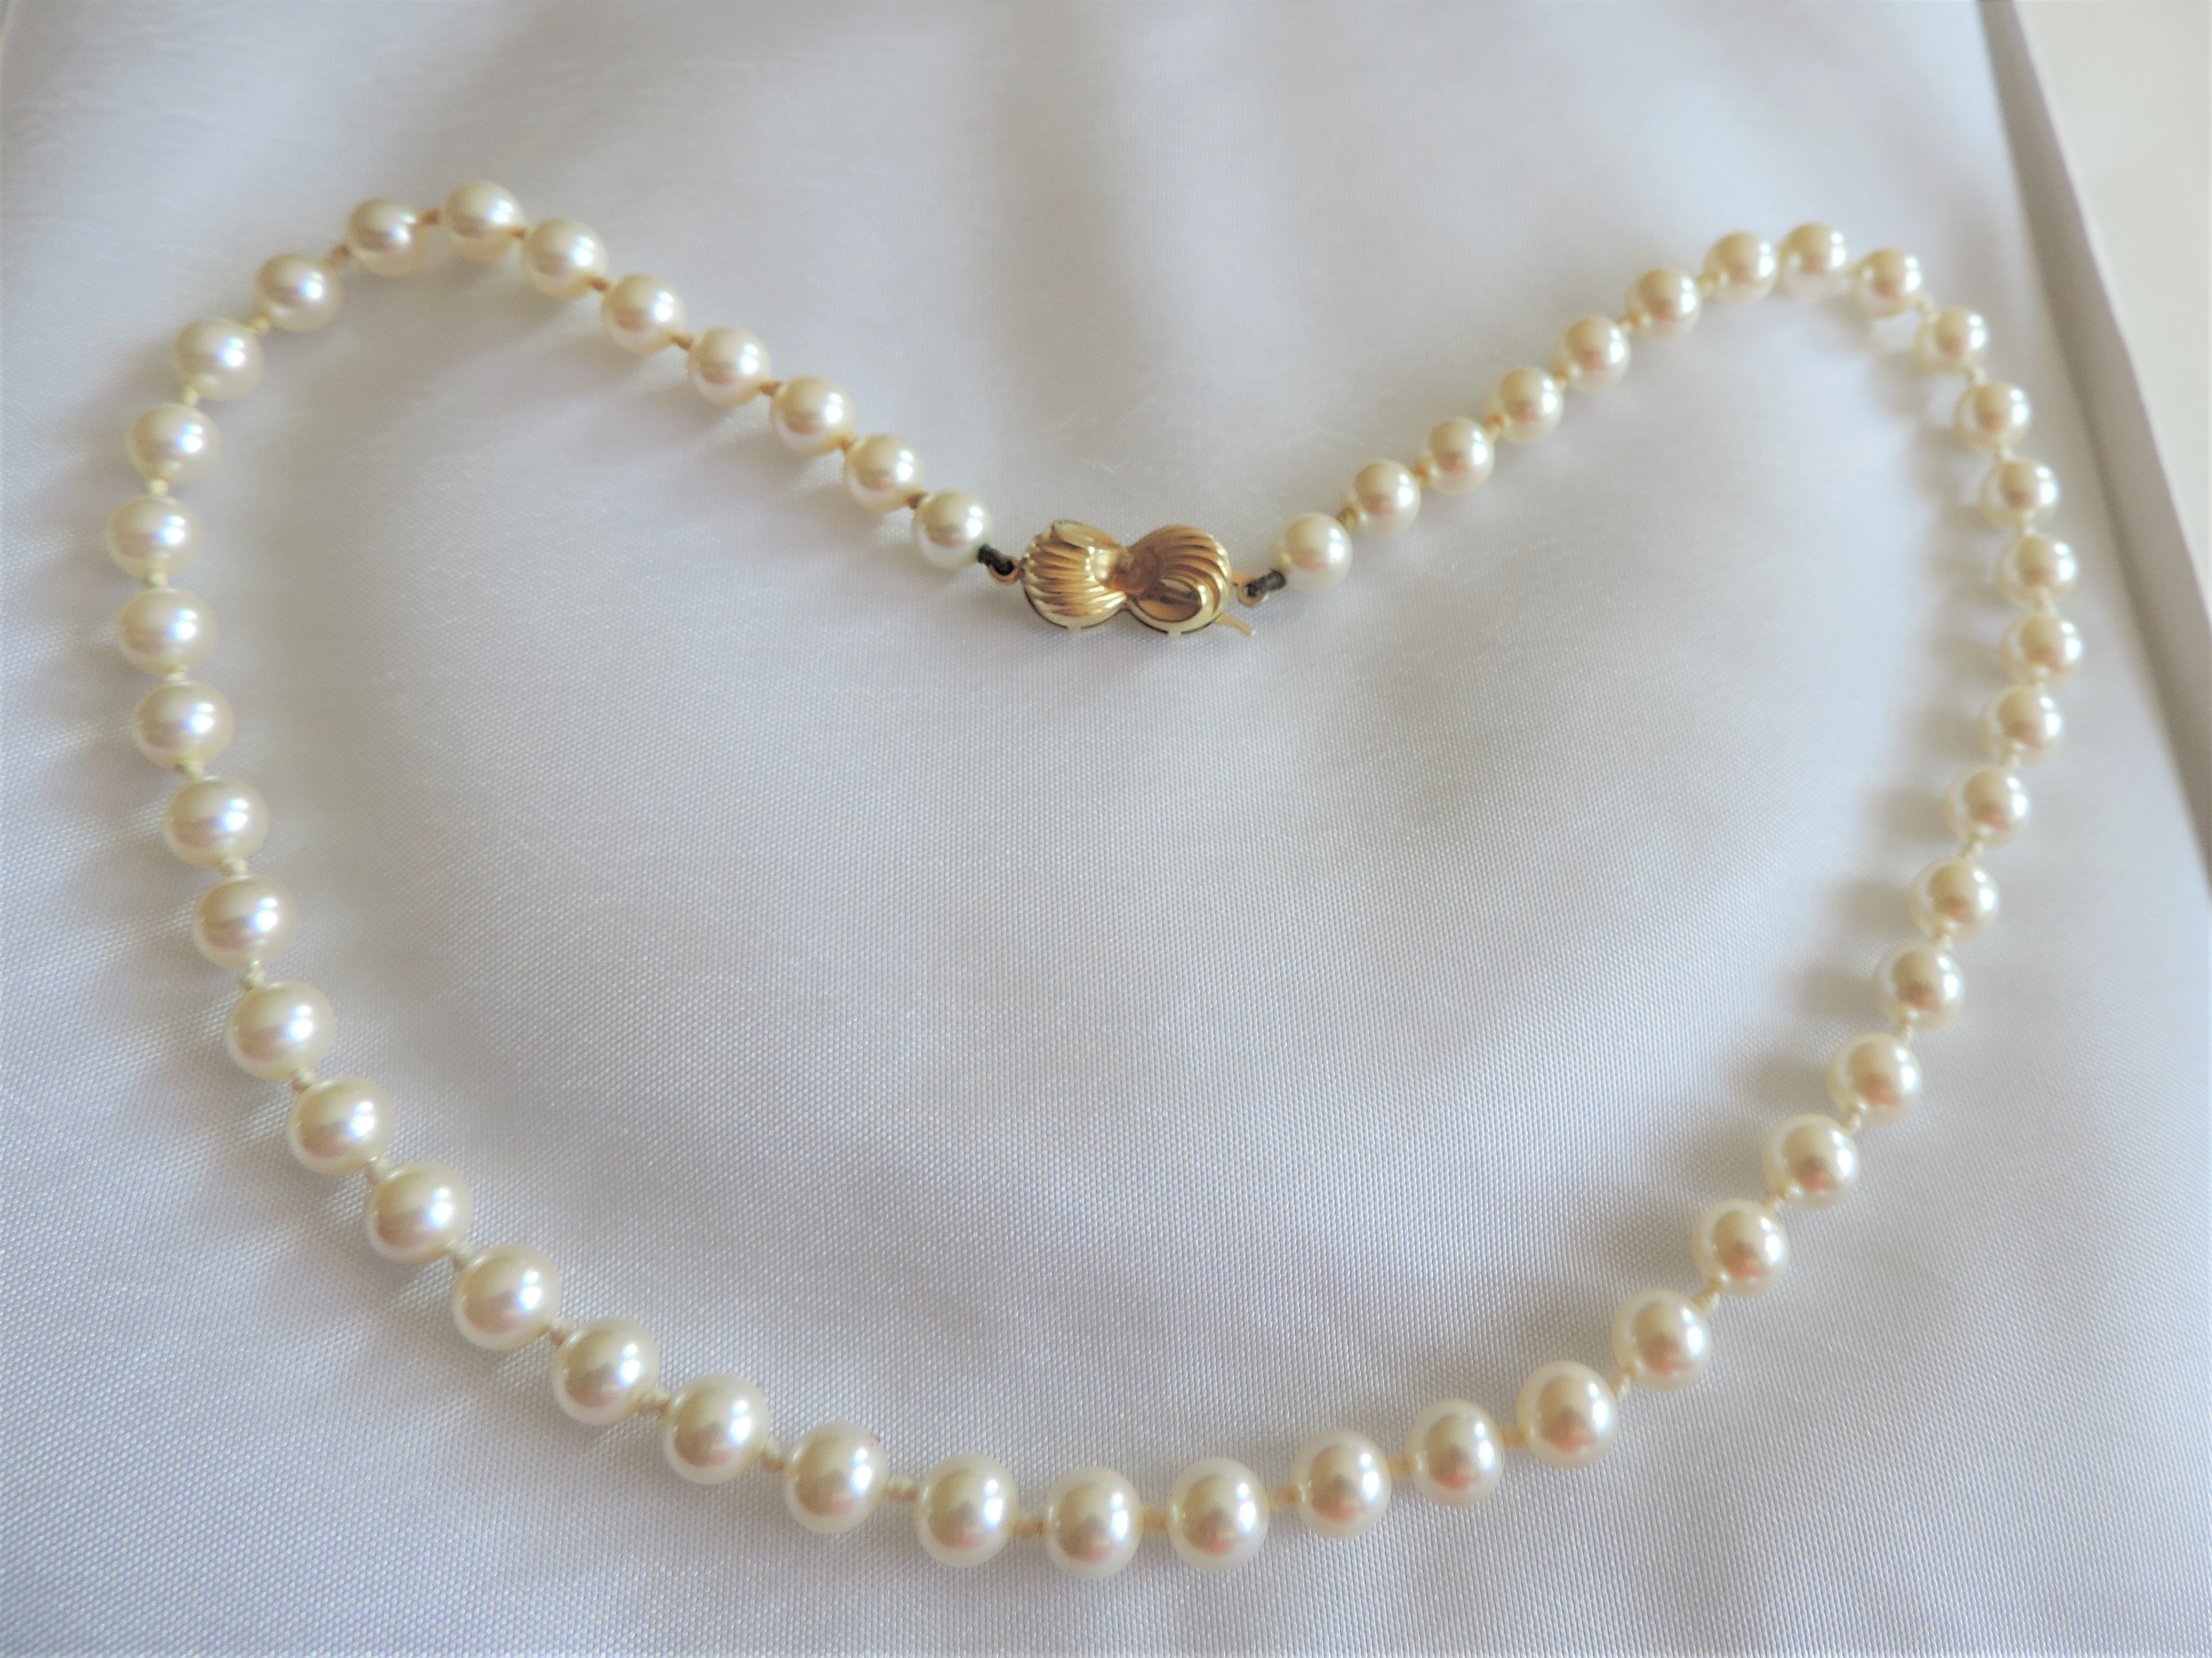 Vintage Pearl Necklace - Image 4 of 4